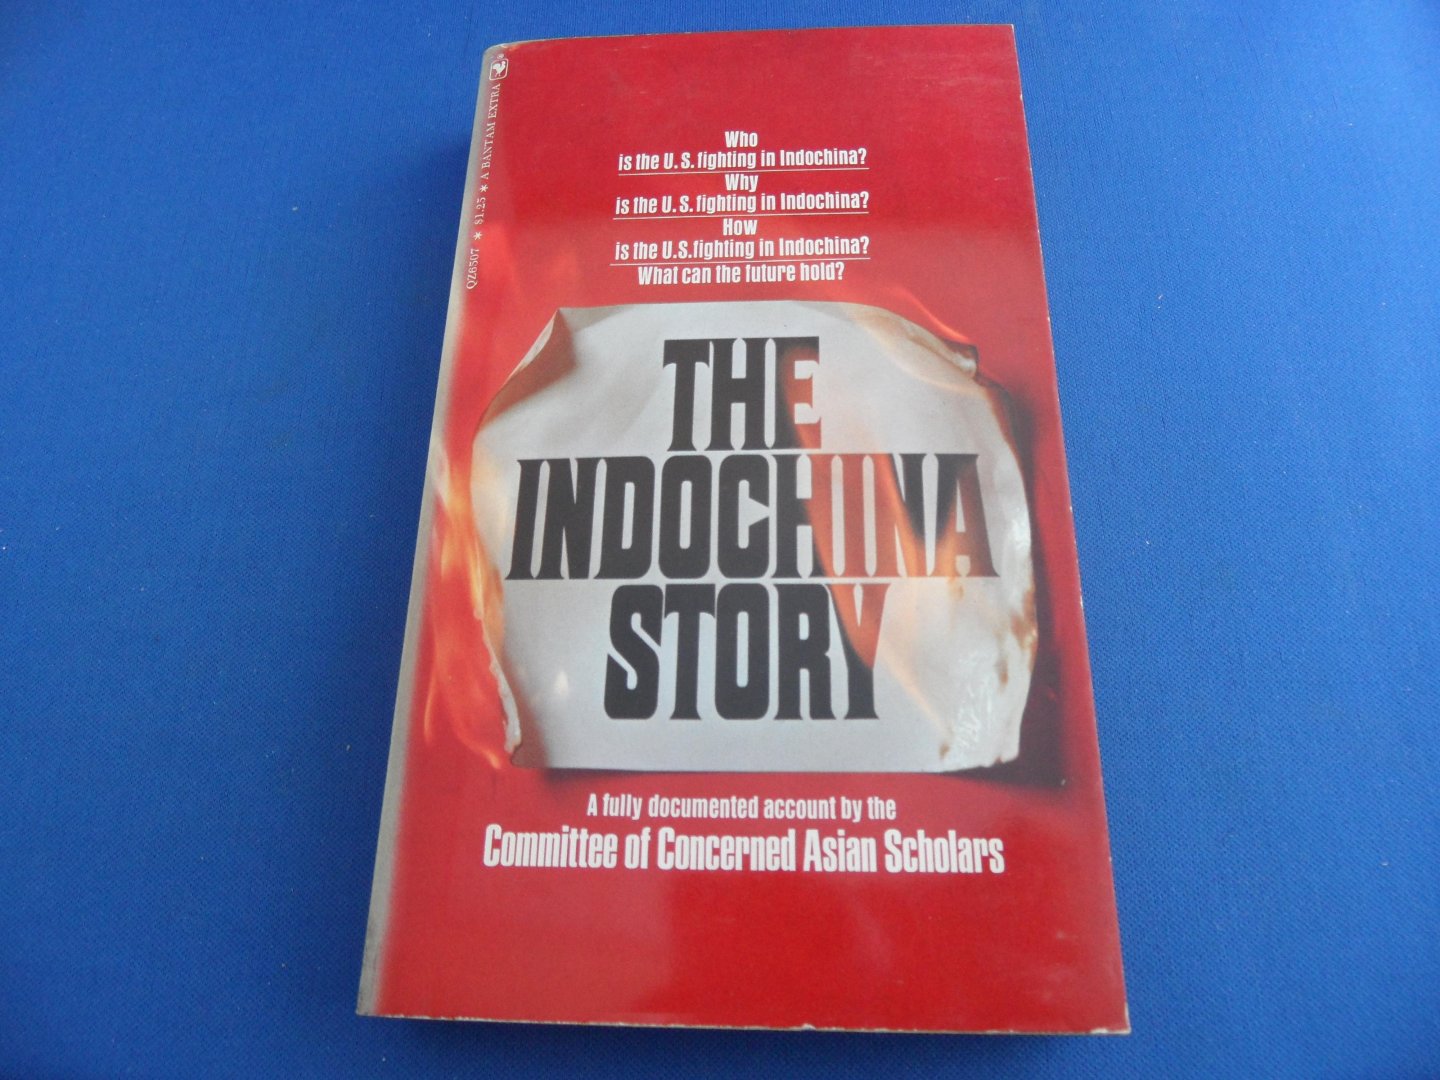 Committe of Concerned Asian Scholars - the Indochina Story. A fully documented account by the Committee of Concerned Asian Scholars